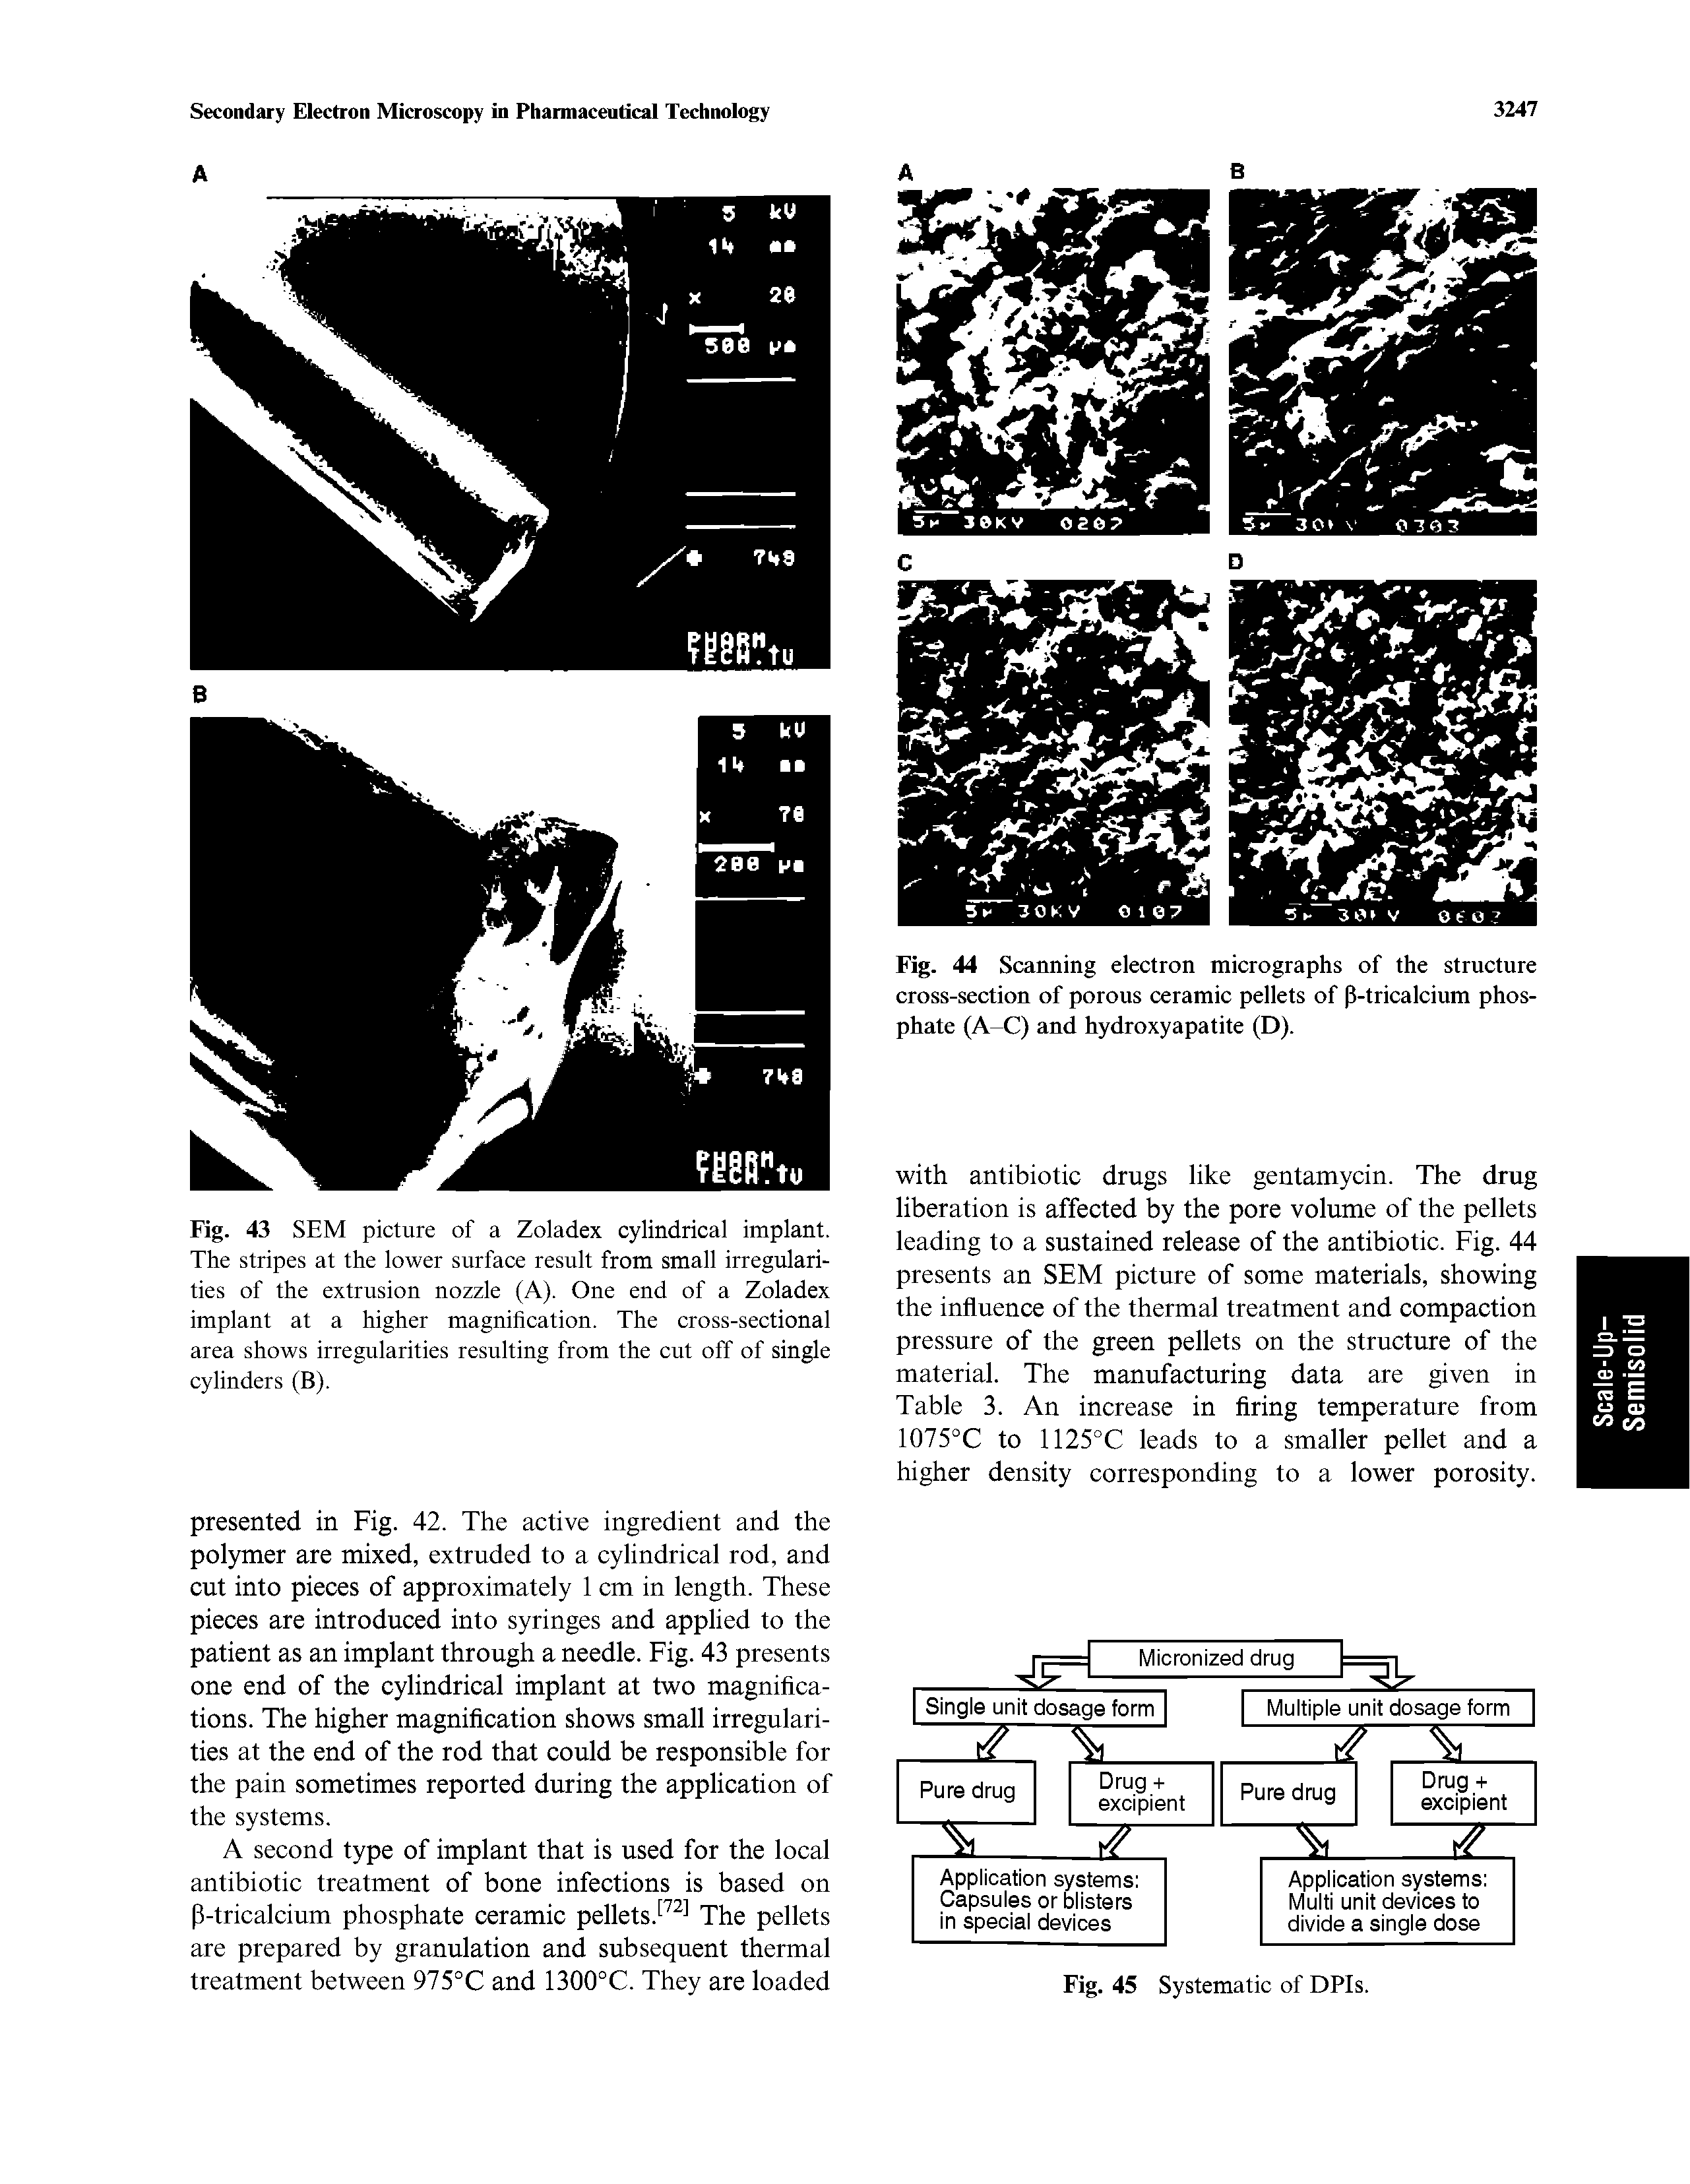 Fig. 44 Scanning electron micrographs of the structure cross-section of porous ceramic pellets of P-tricalcium phosphate (A-C) and hydroxyapatite (D).